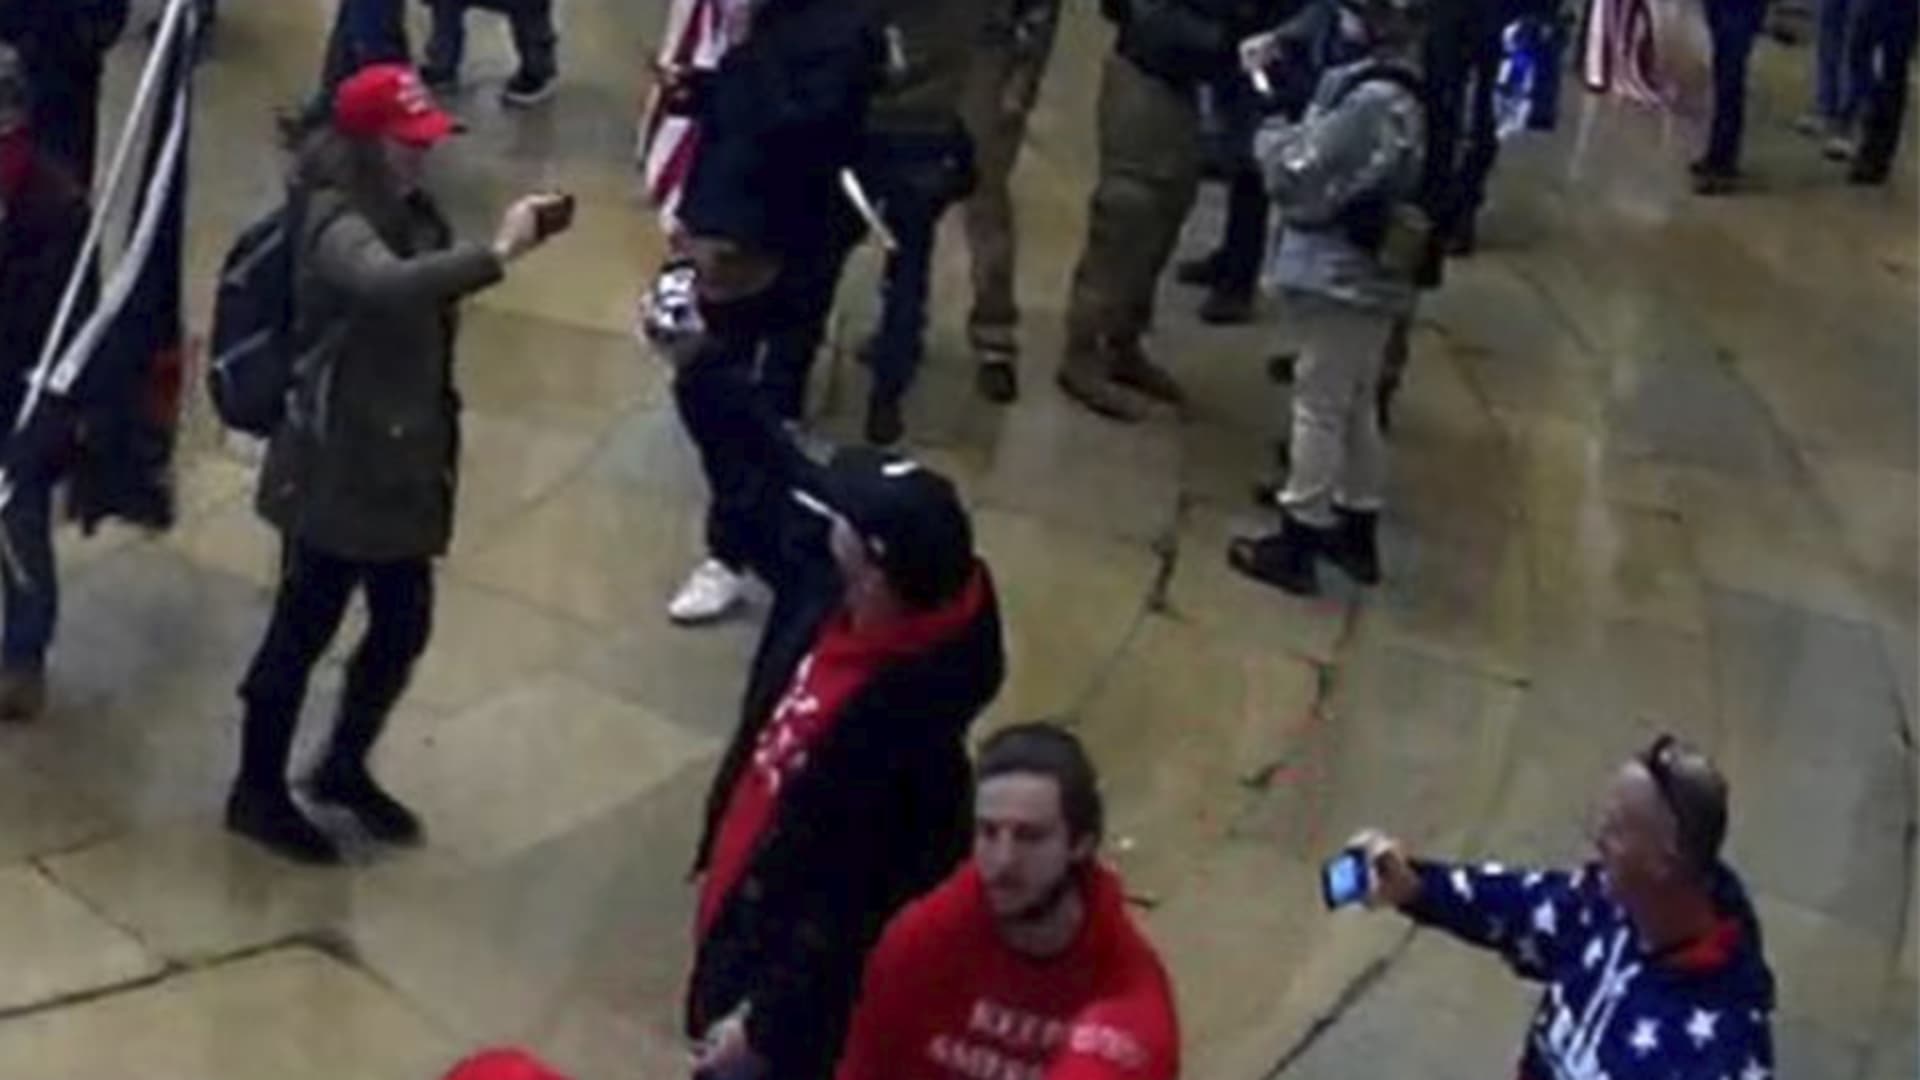 DOJ submits photos as part of a Statement of Facts, identifying Former NYPD officer Sara Carpenter (dressed in red hat, green jacket wearing a grey backpack), participating in the Capitol Riots on Jan. 6th, 2021.